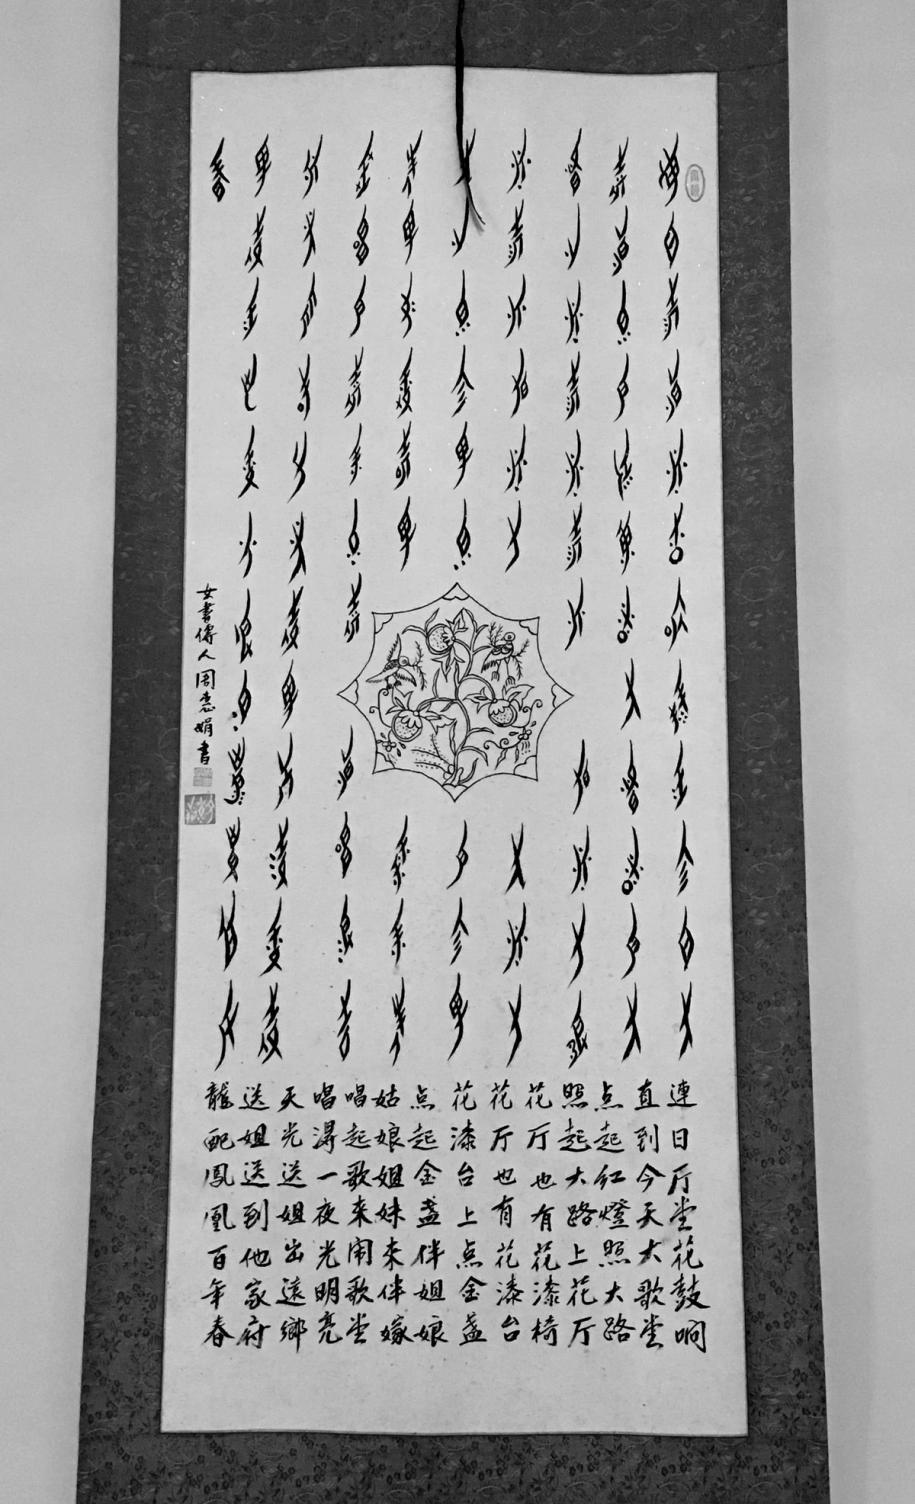 Calligraphy scroll in Nüshu, with translation in Chinese Hanzi to the bottom.